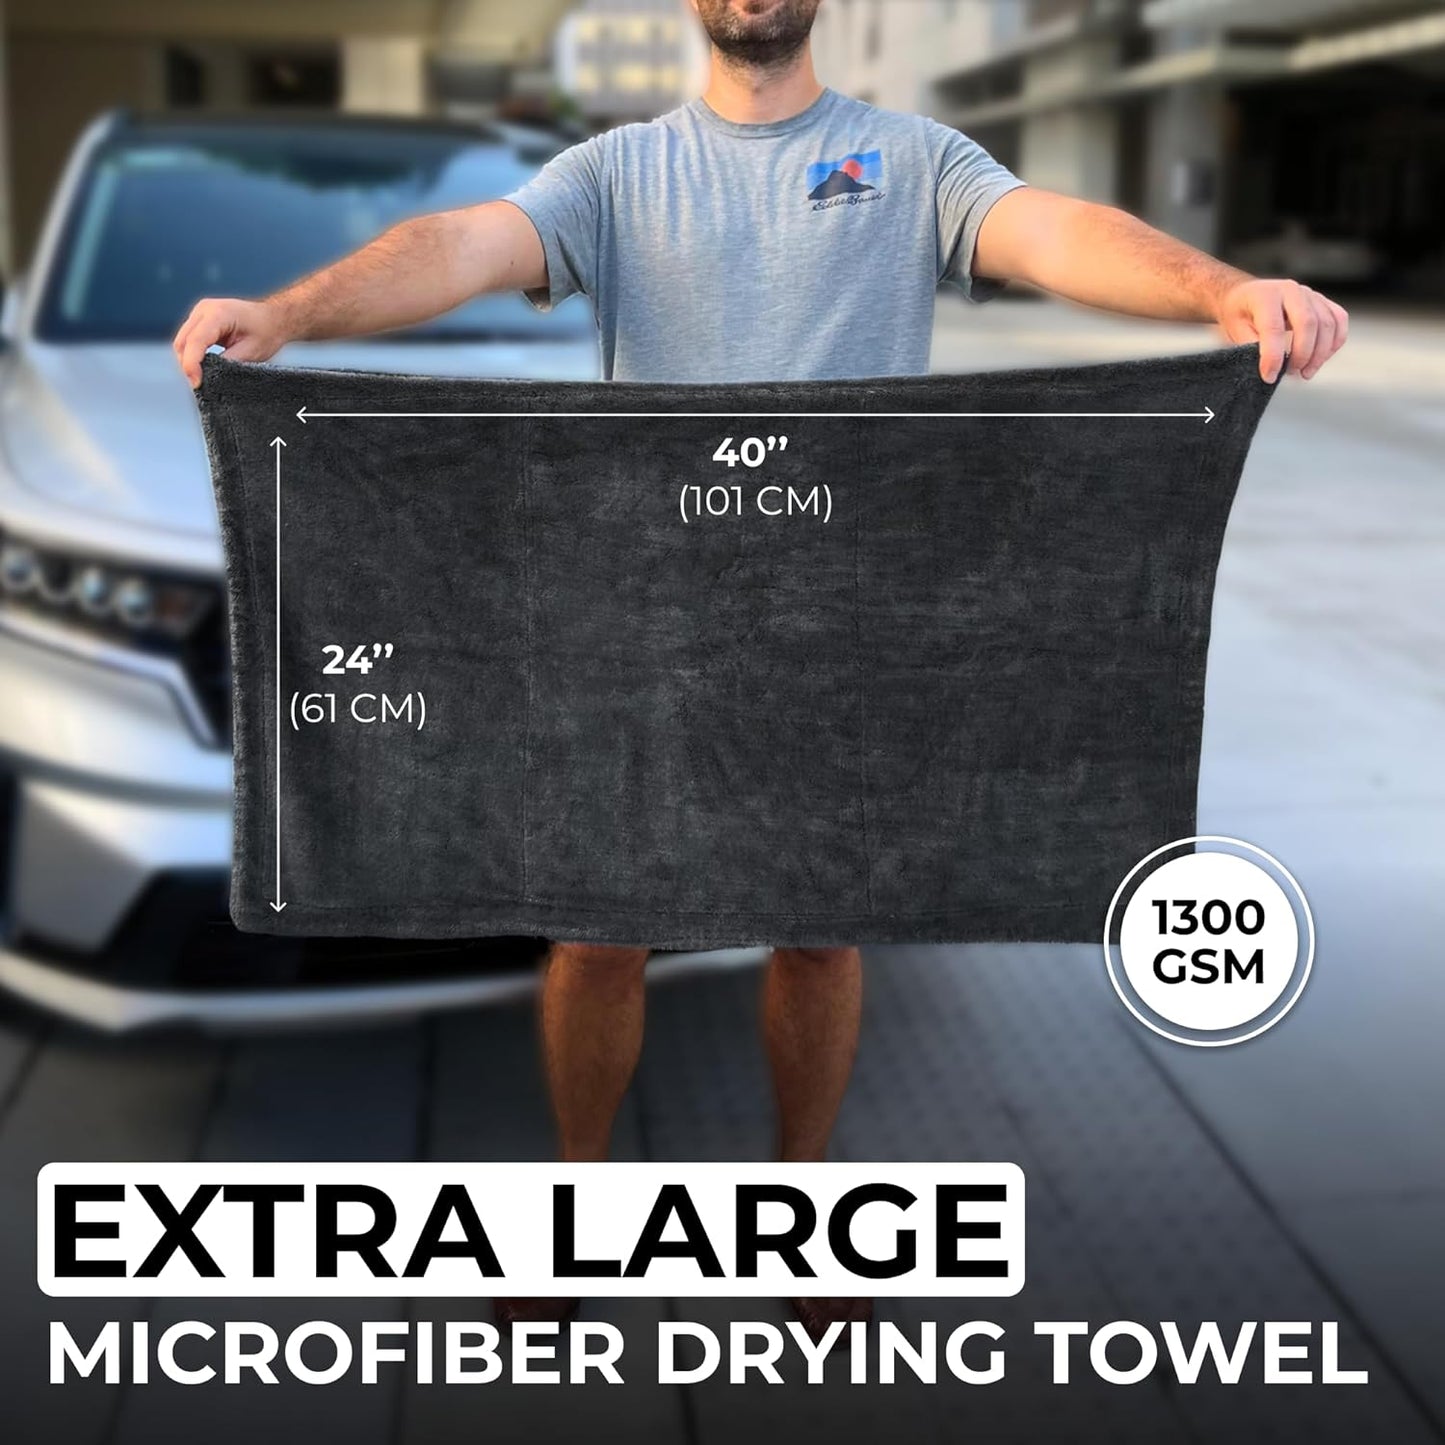 Car Drying Towel Extra Large, 1300GSM Microfiber, Super Absorbent Towel - Auto Drying Towel for Cars Trucks SUV